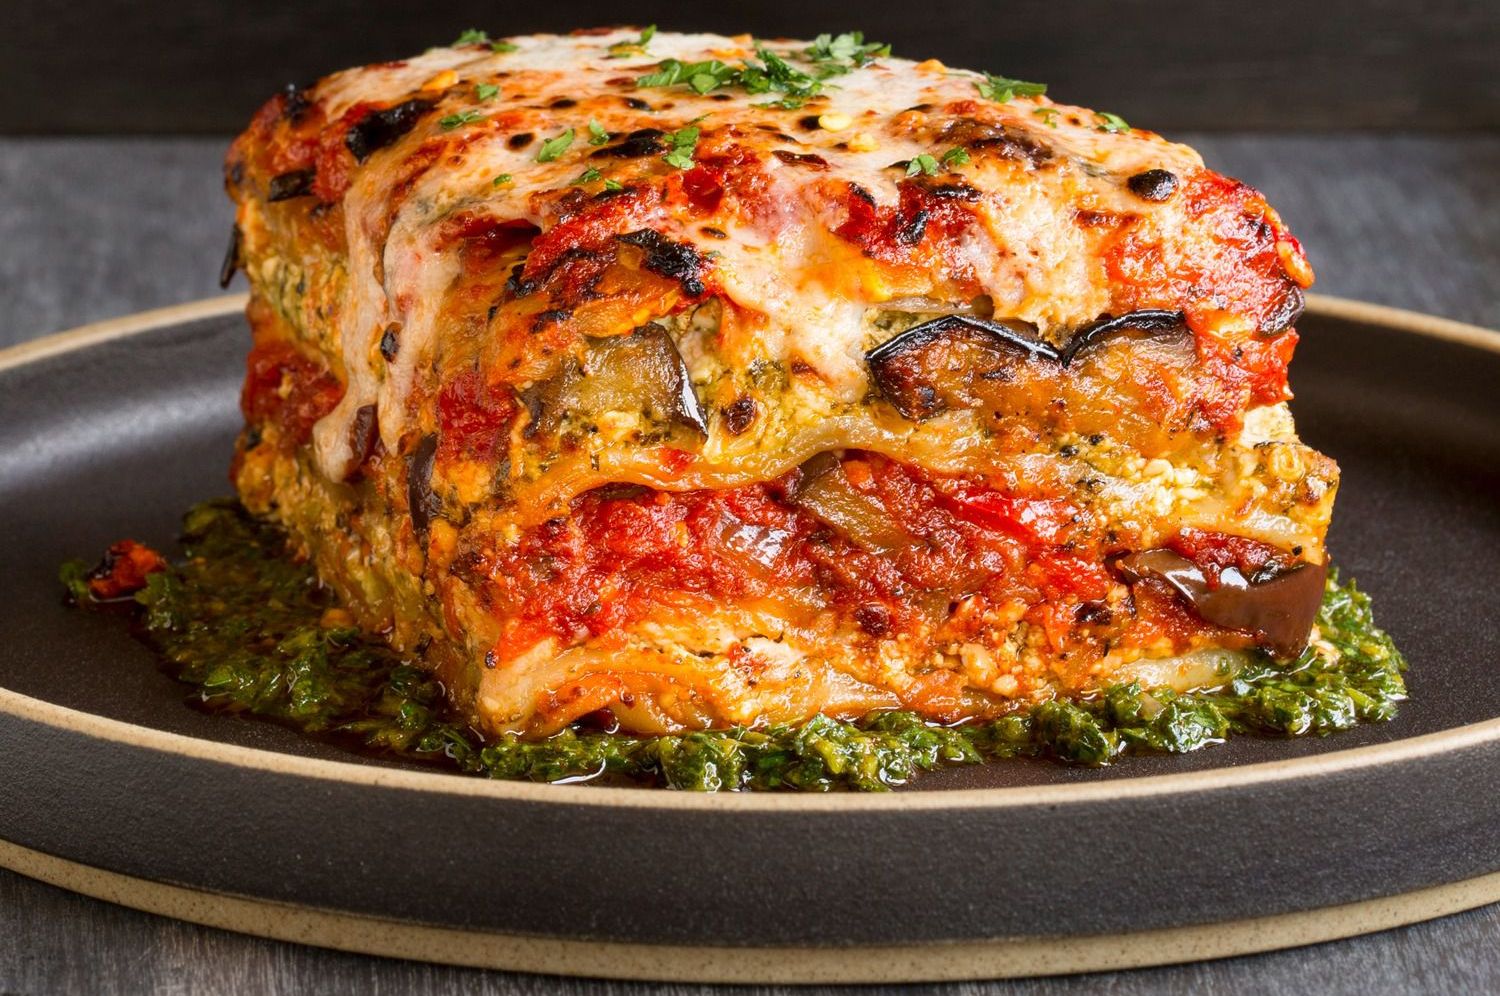 Settle These Food Debates and We’ll Guess Which Three Foods You Love the Most lasagna layers